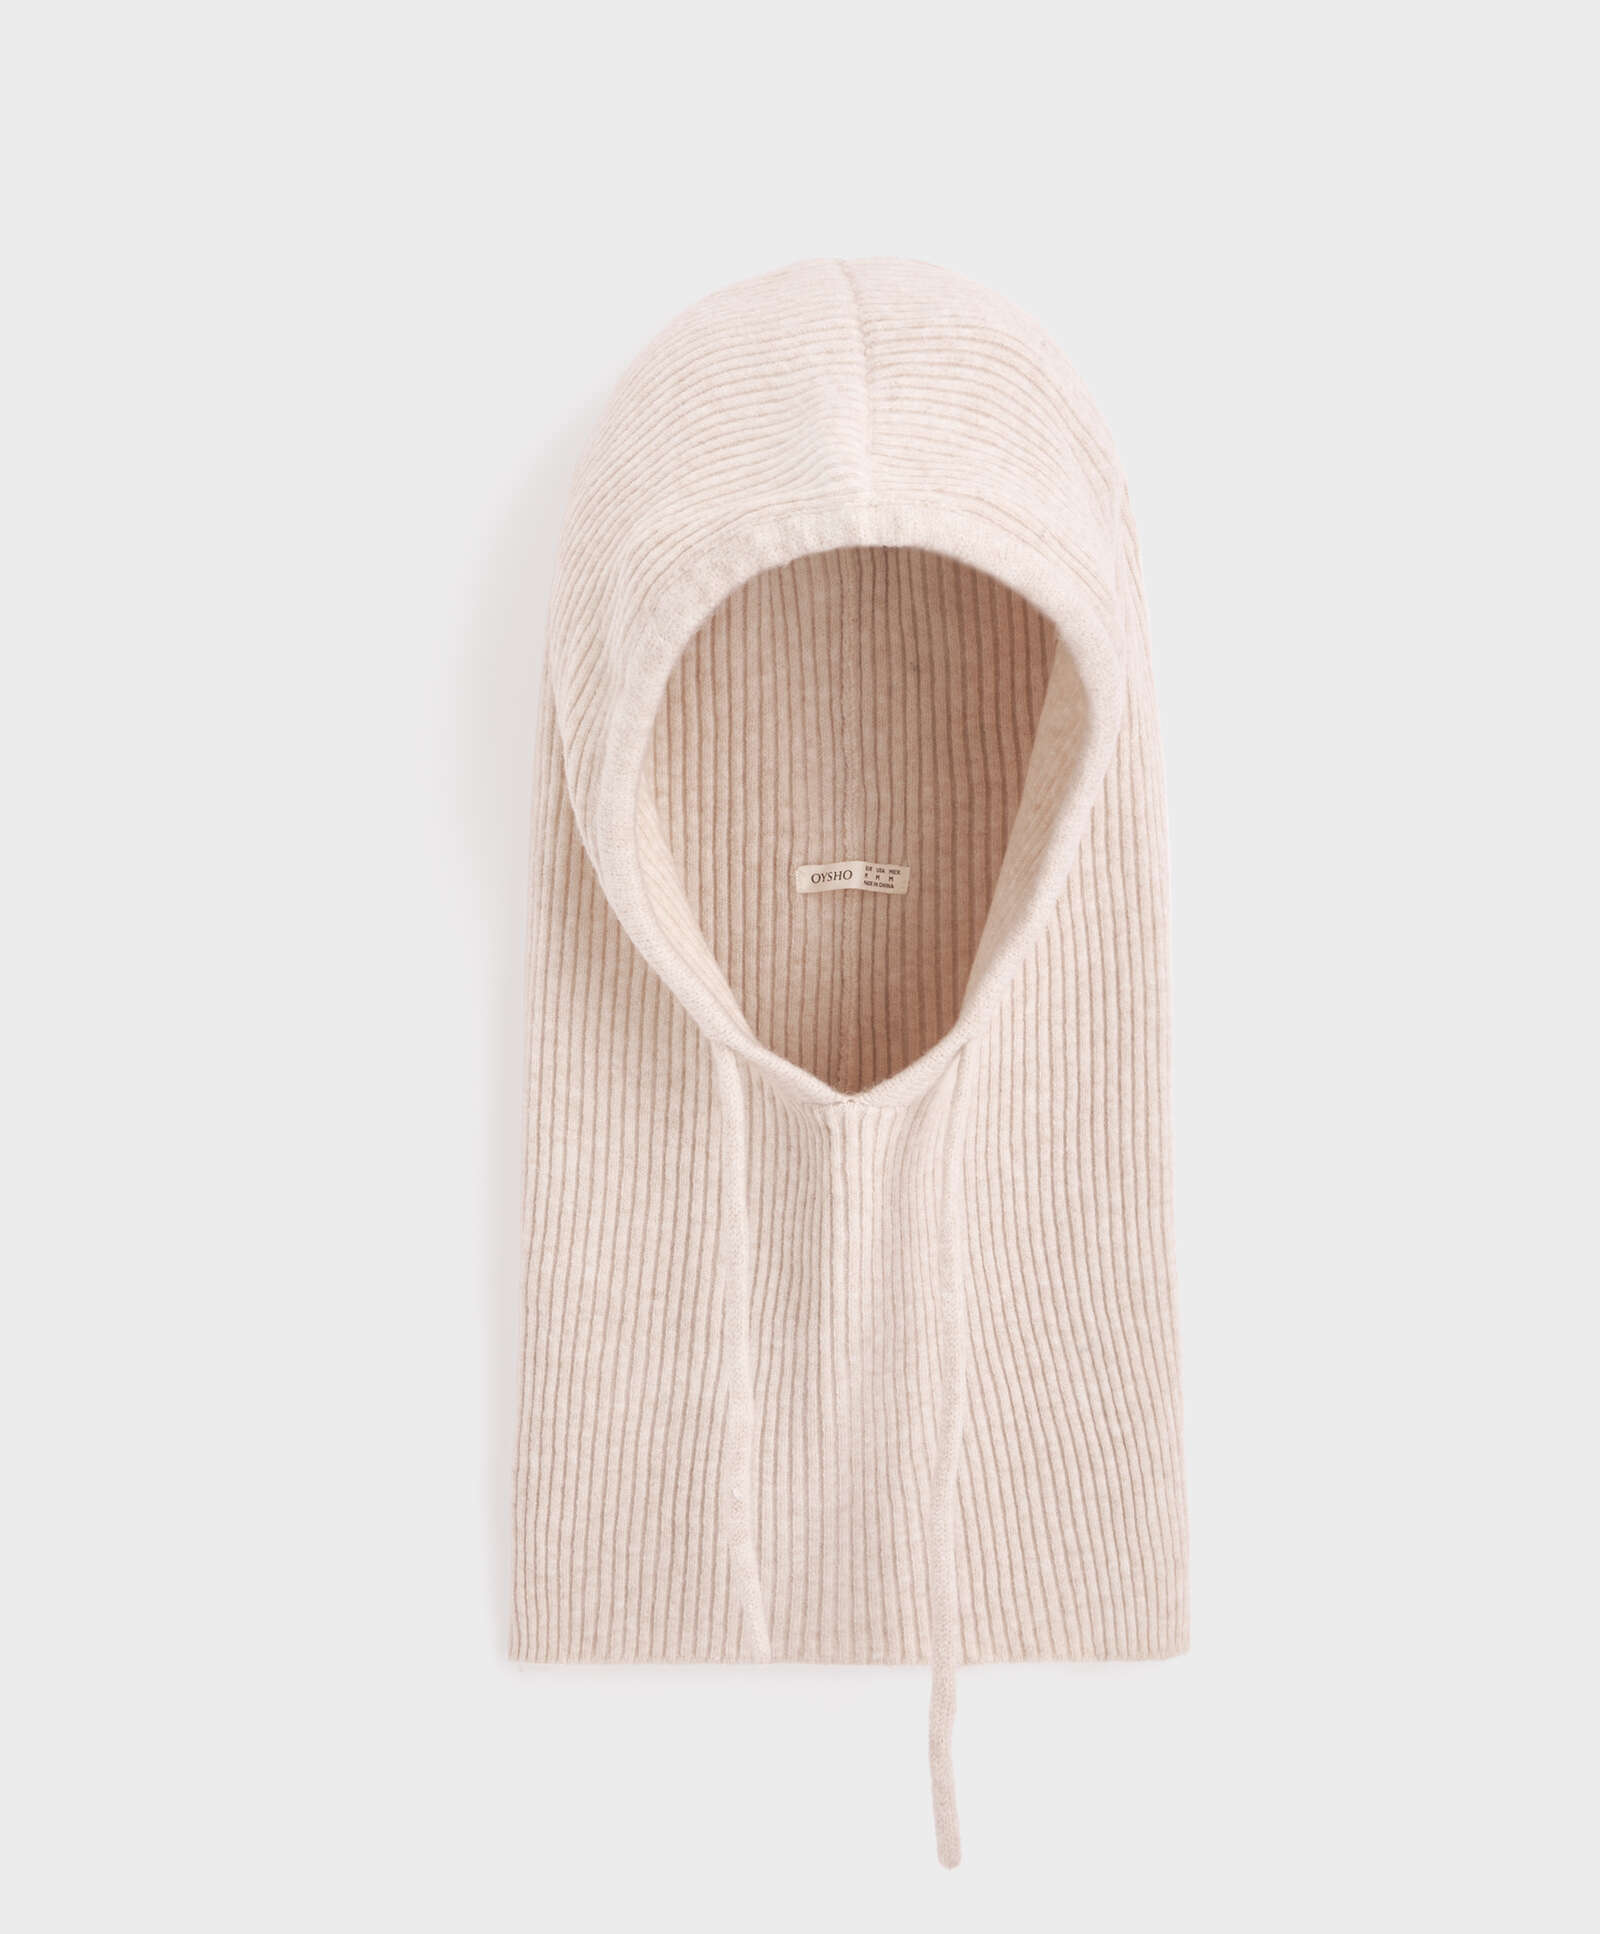 Ribbed knit hood - Knitwear - Accessories | OYSHO United States